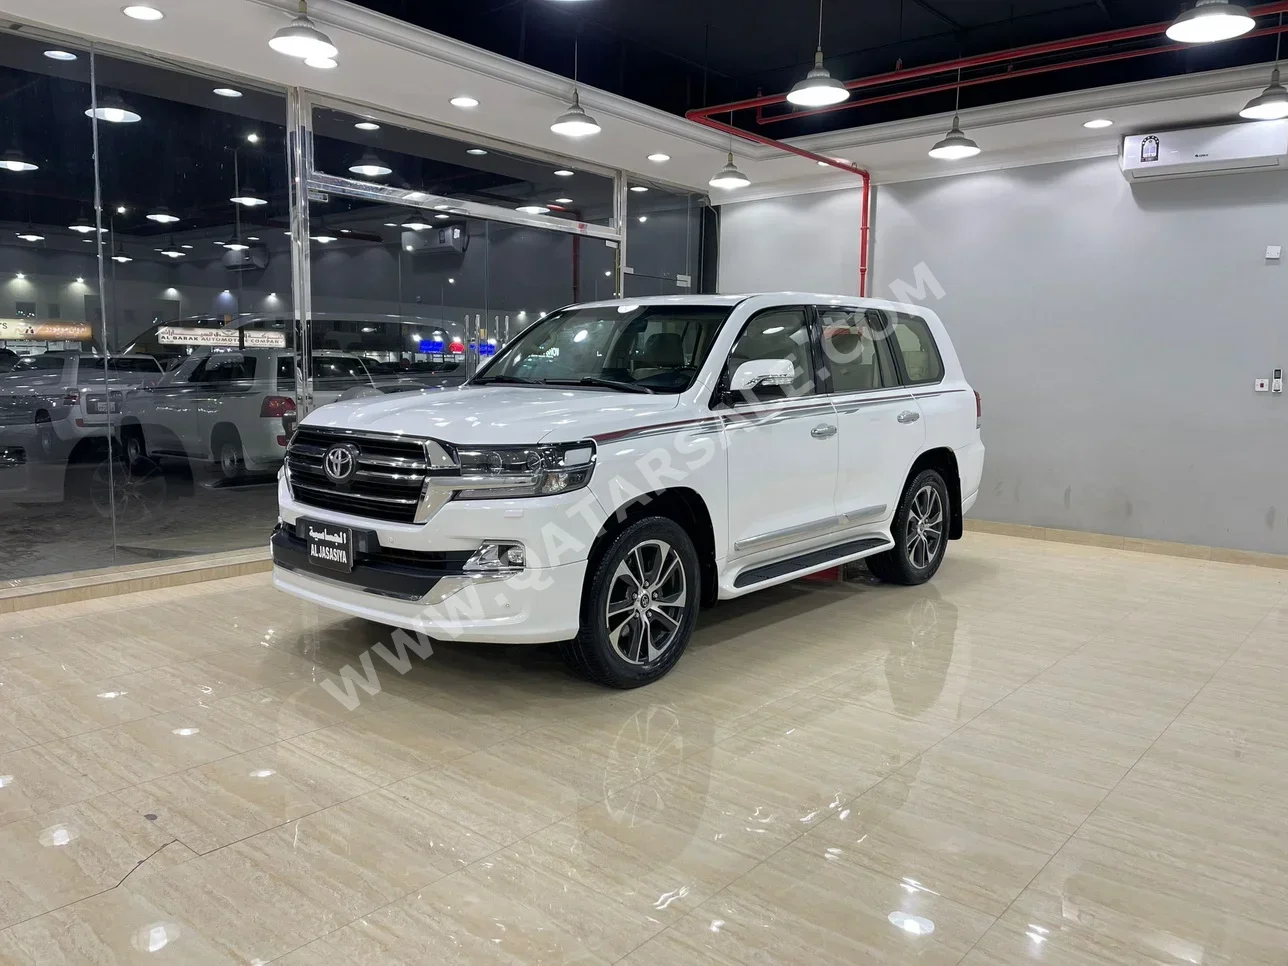 Toyota  Land Cruiser  GXR- Grand Touring  2020  Automatic  172,000 Km  8 Cylinder  Four Wheel Drive (4WD)  SUV  White